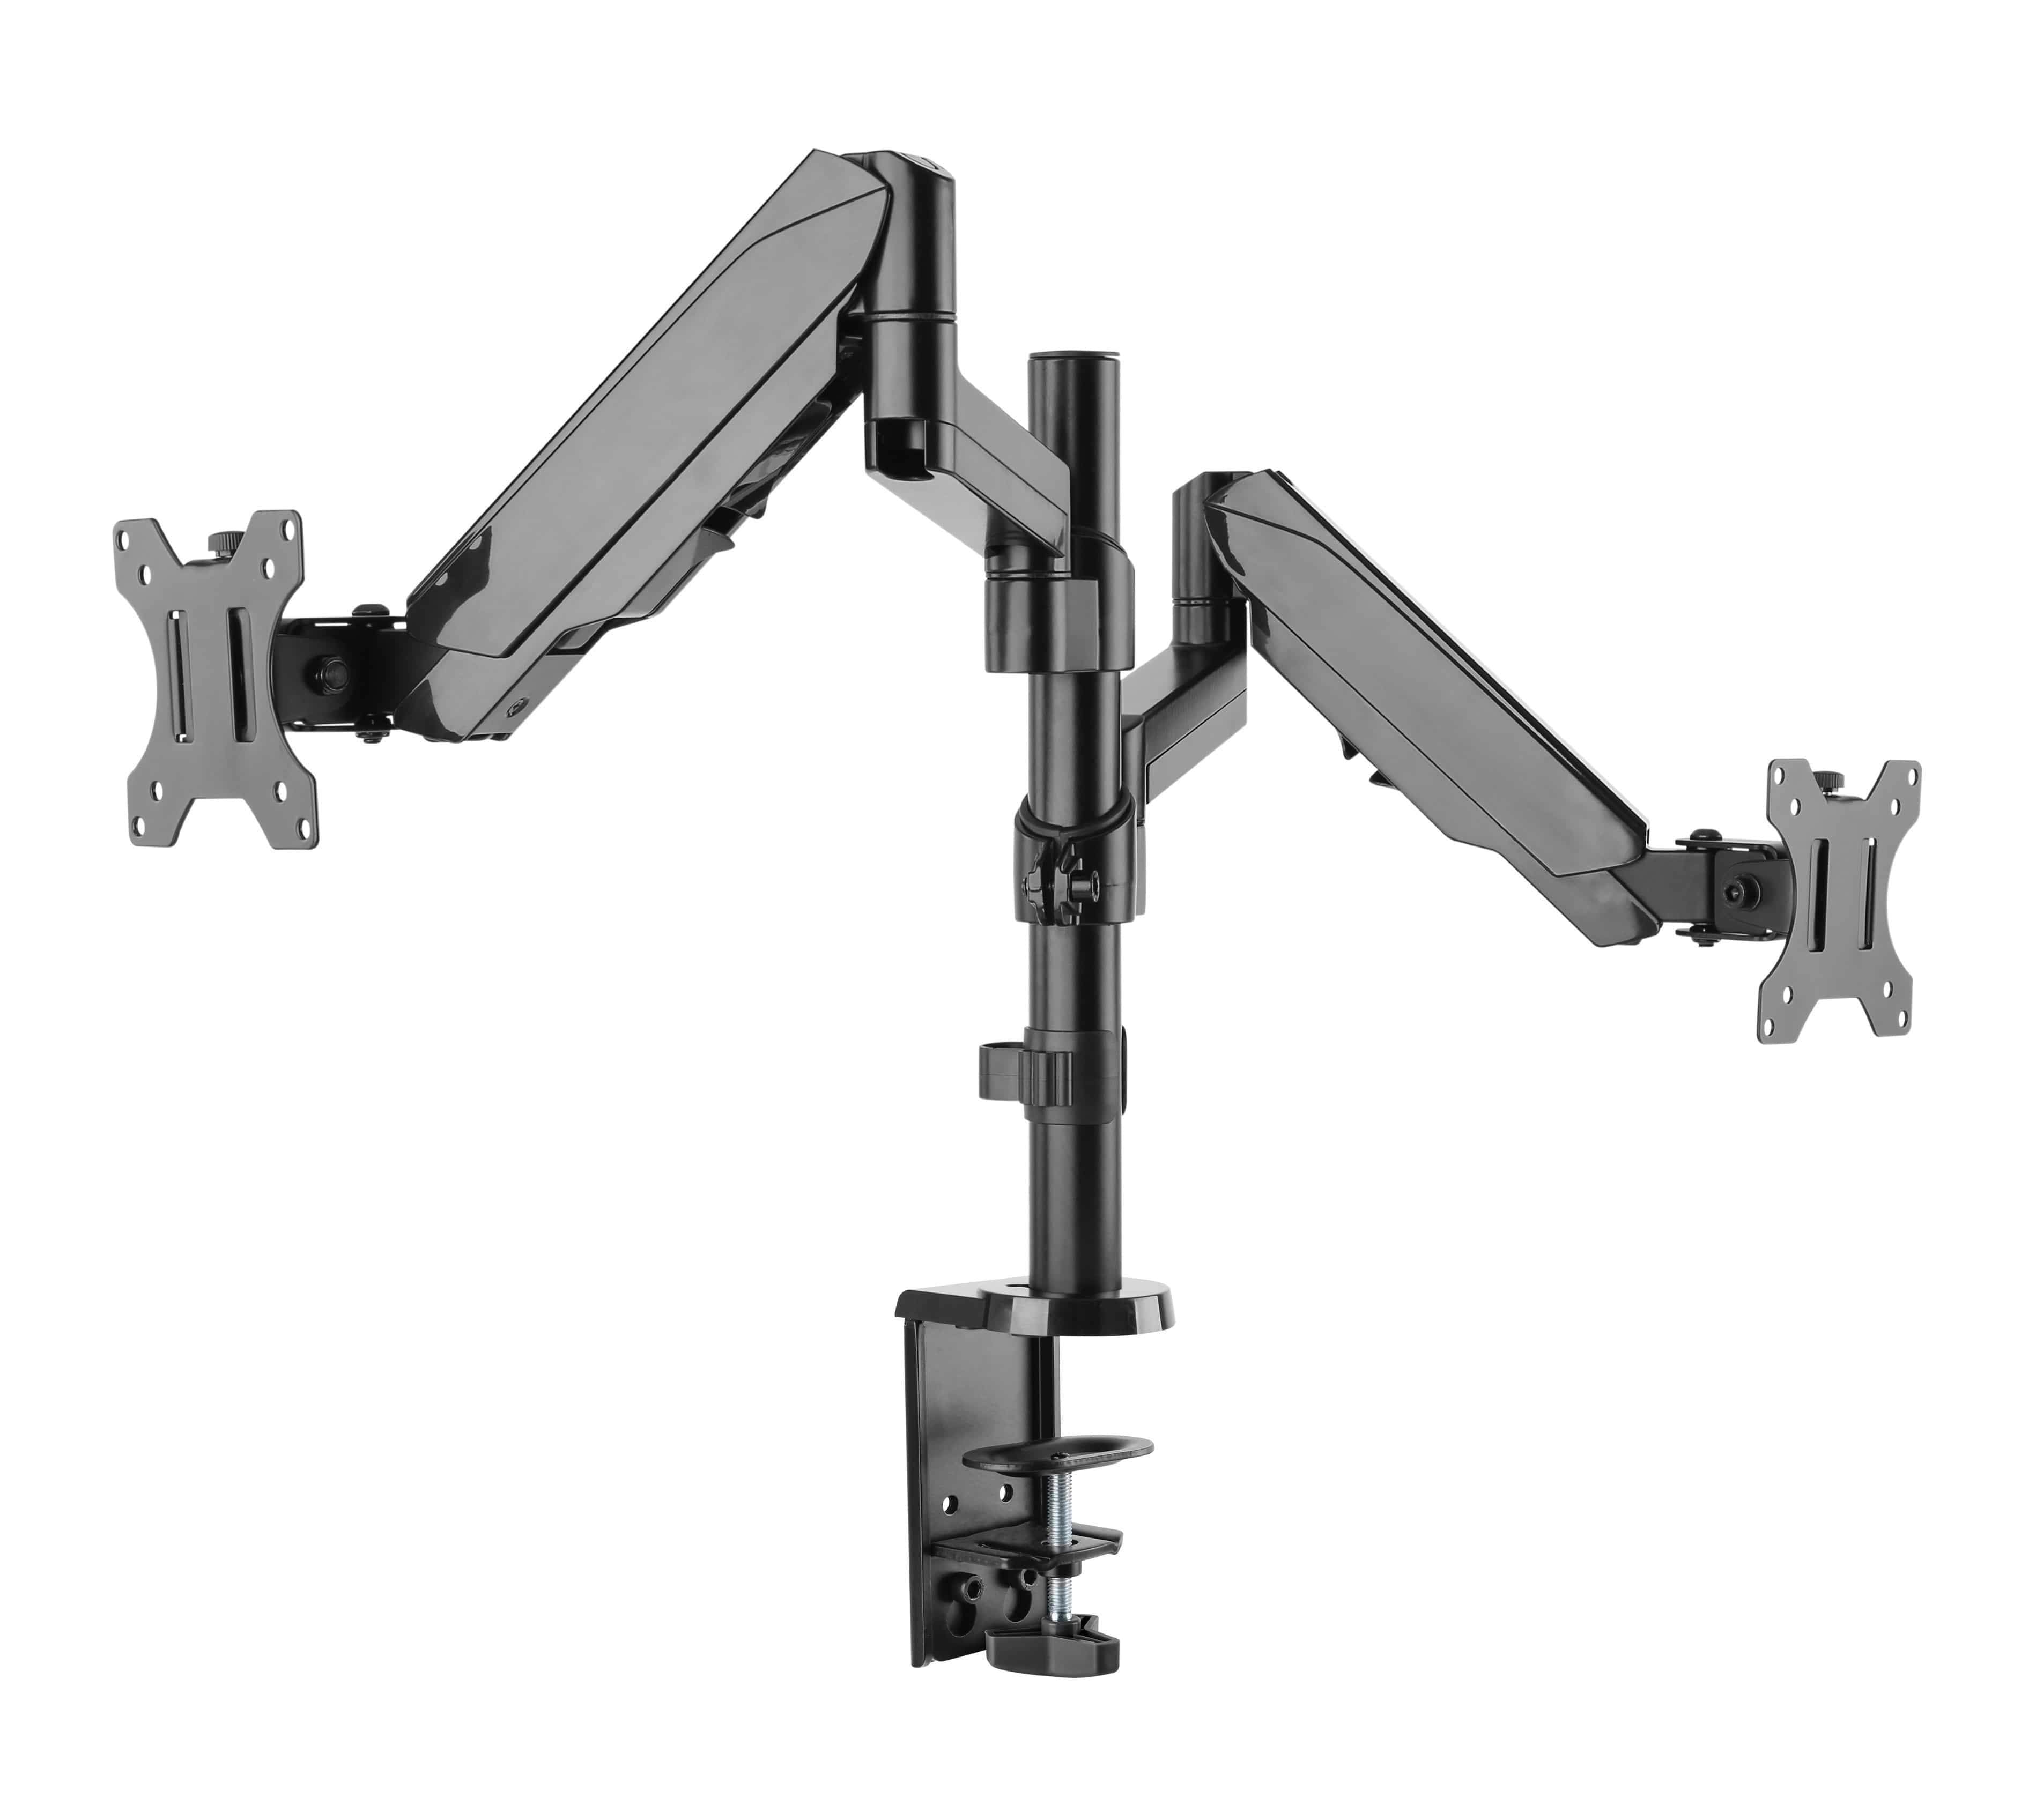 Jestik Dual Monitor Arm Slate Black Jestik Advanced Flex 2.0 Dual Monitor Arm Clamp and Bolt Through Mount - Gas Assisted Arm, For Two 17"-32" Computer Screens, Holds up to 17.6 lbs.